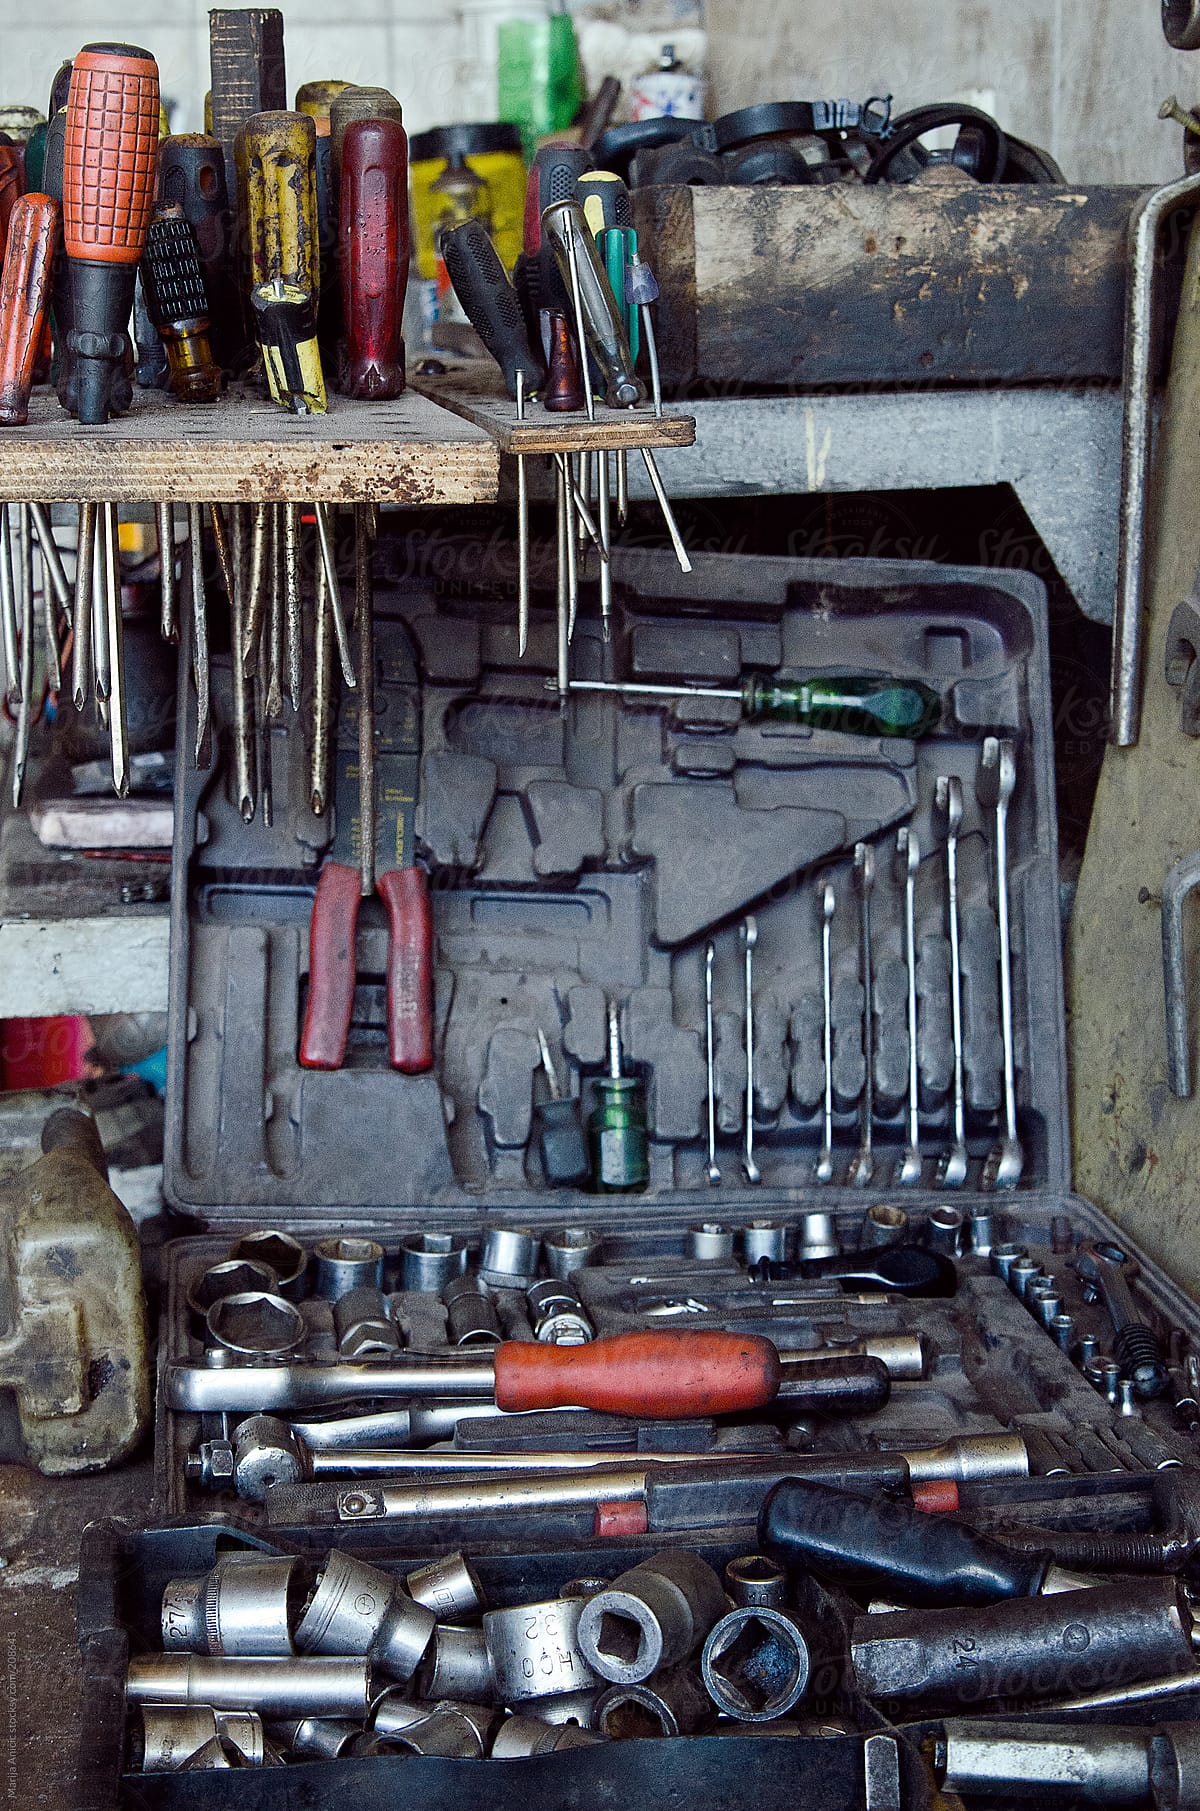 All type of hand tools